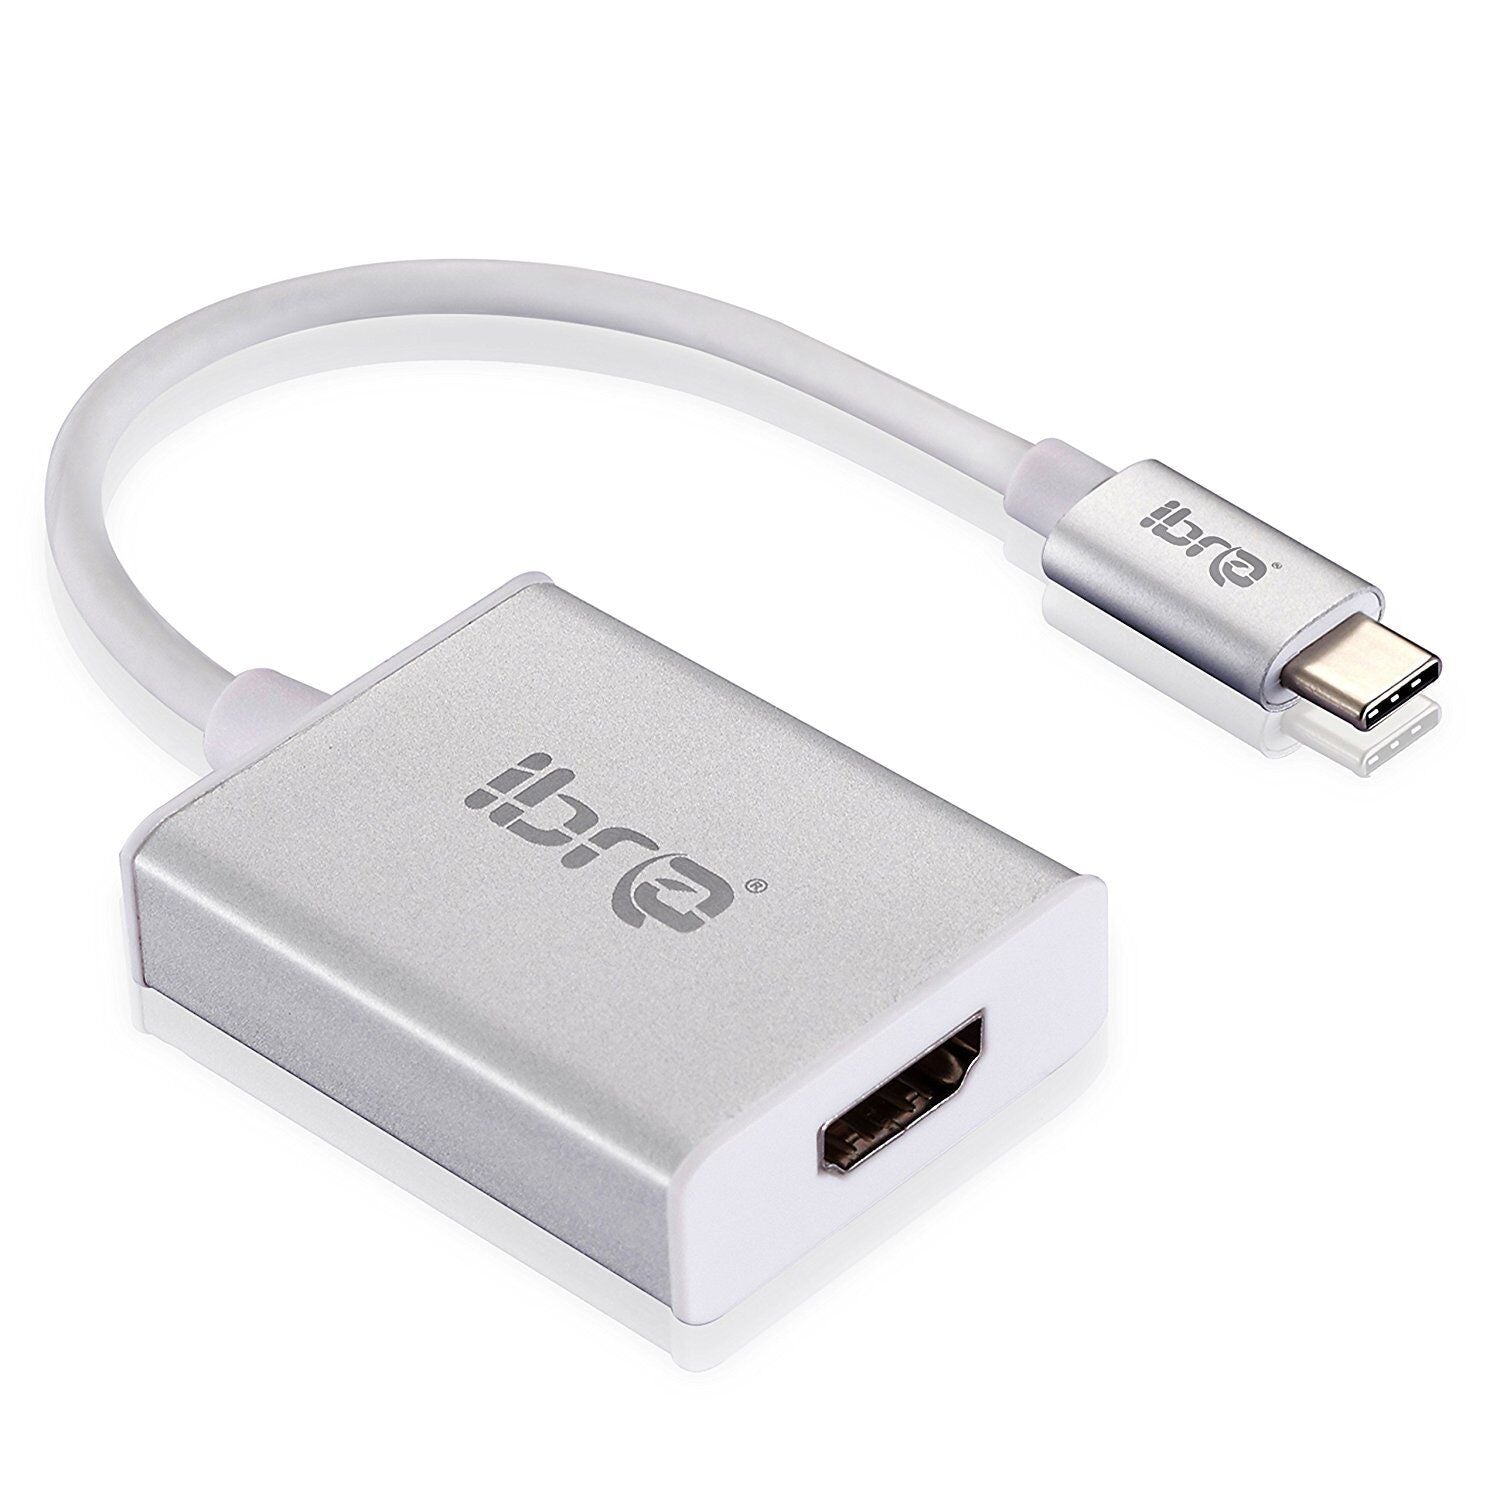 For iPhone Android Type C to HDMI USB 3.1 Cable Adapter 4K HD TV Video Converter